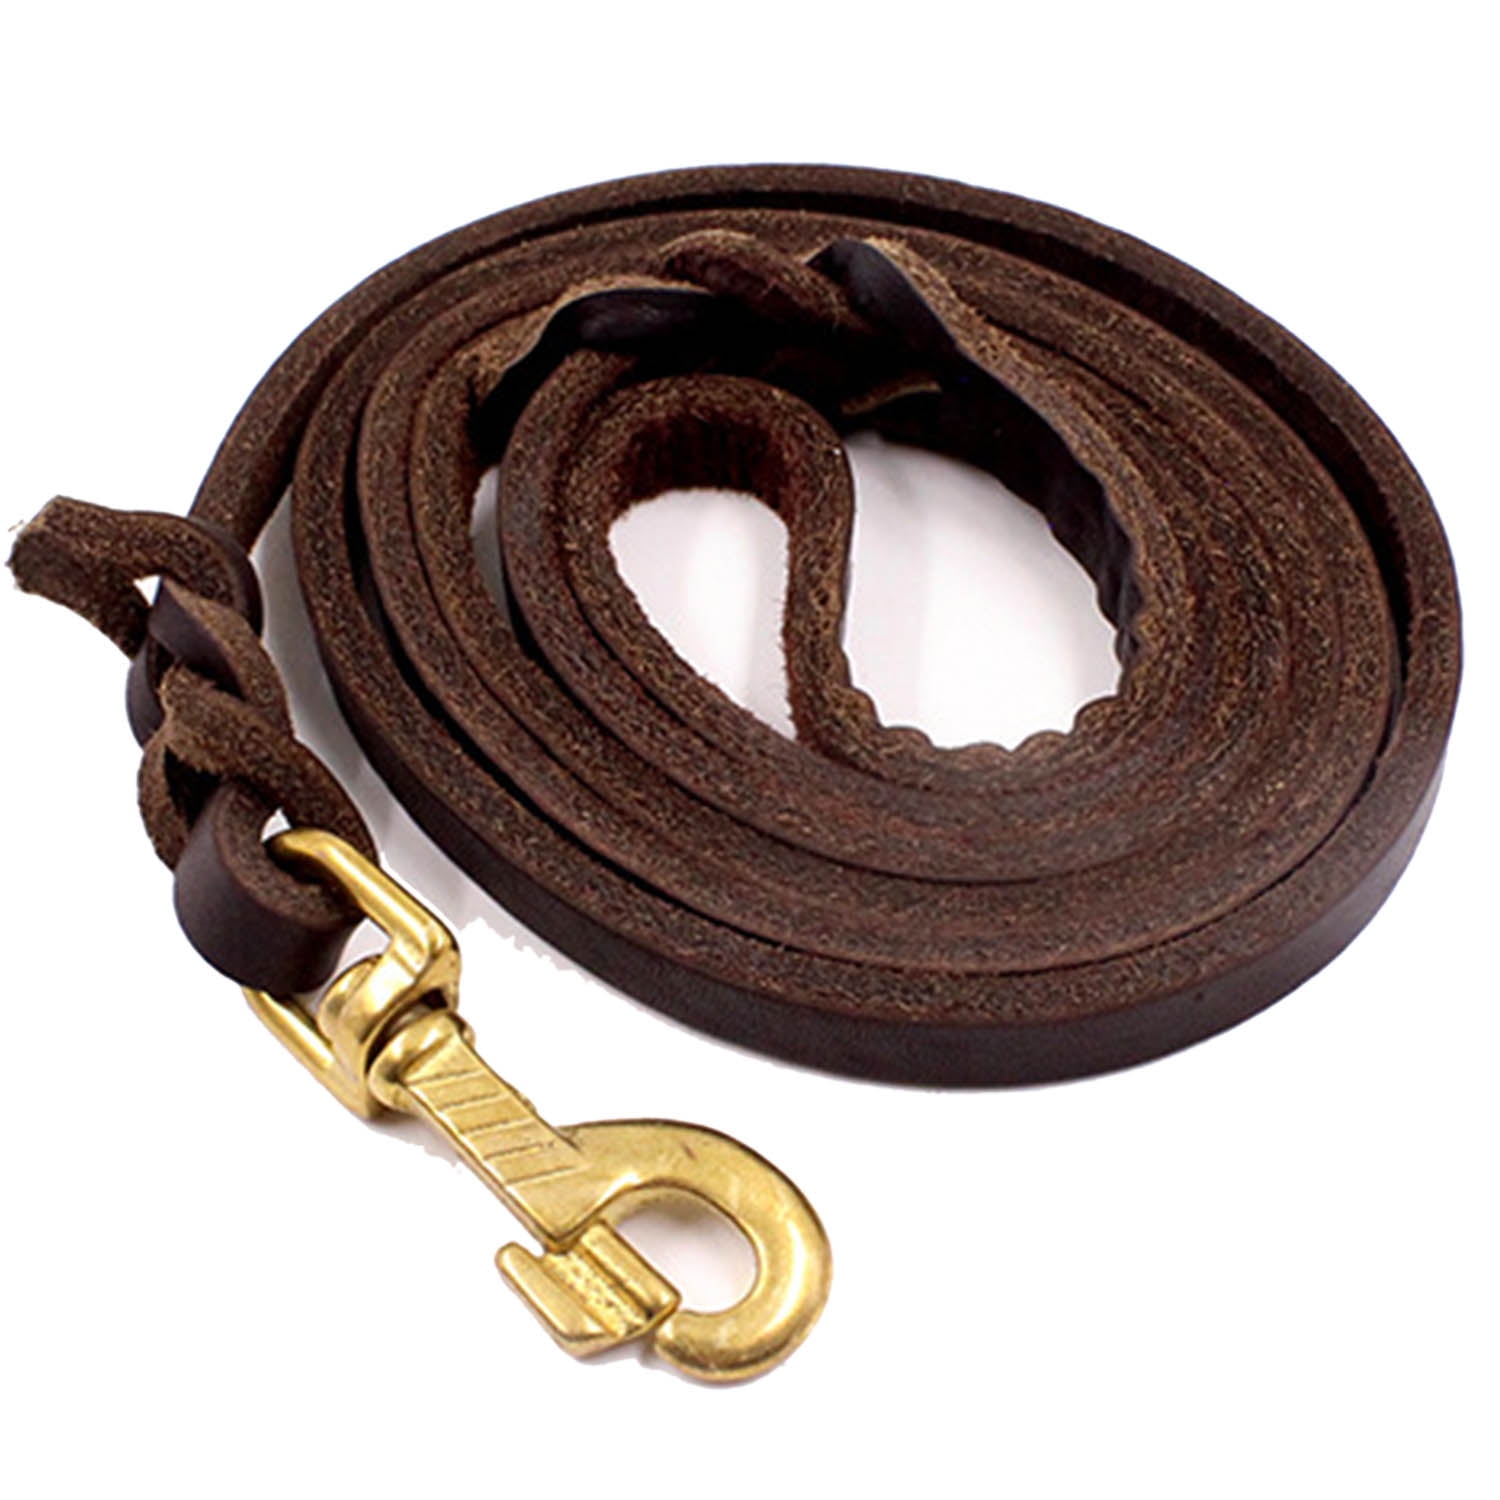 4ft Heavy Duty Leather Dog Leash Lead with Padded Handle for Medium Large Breeds 